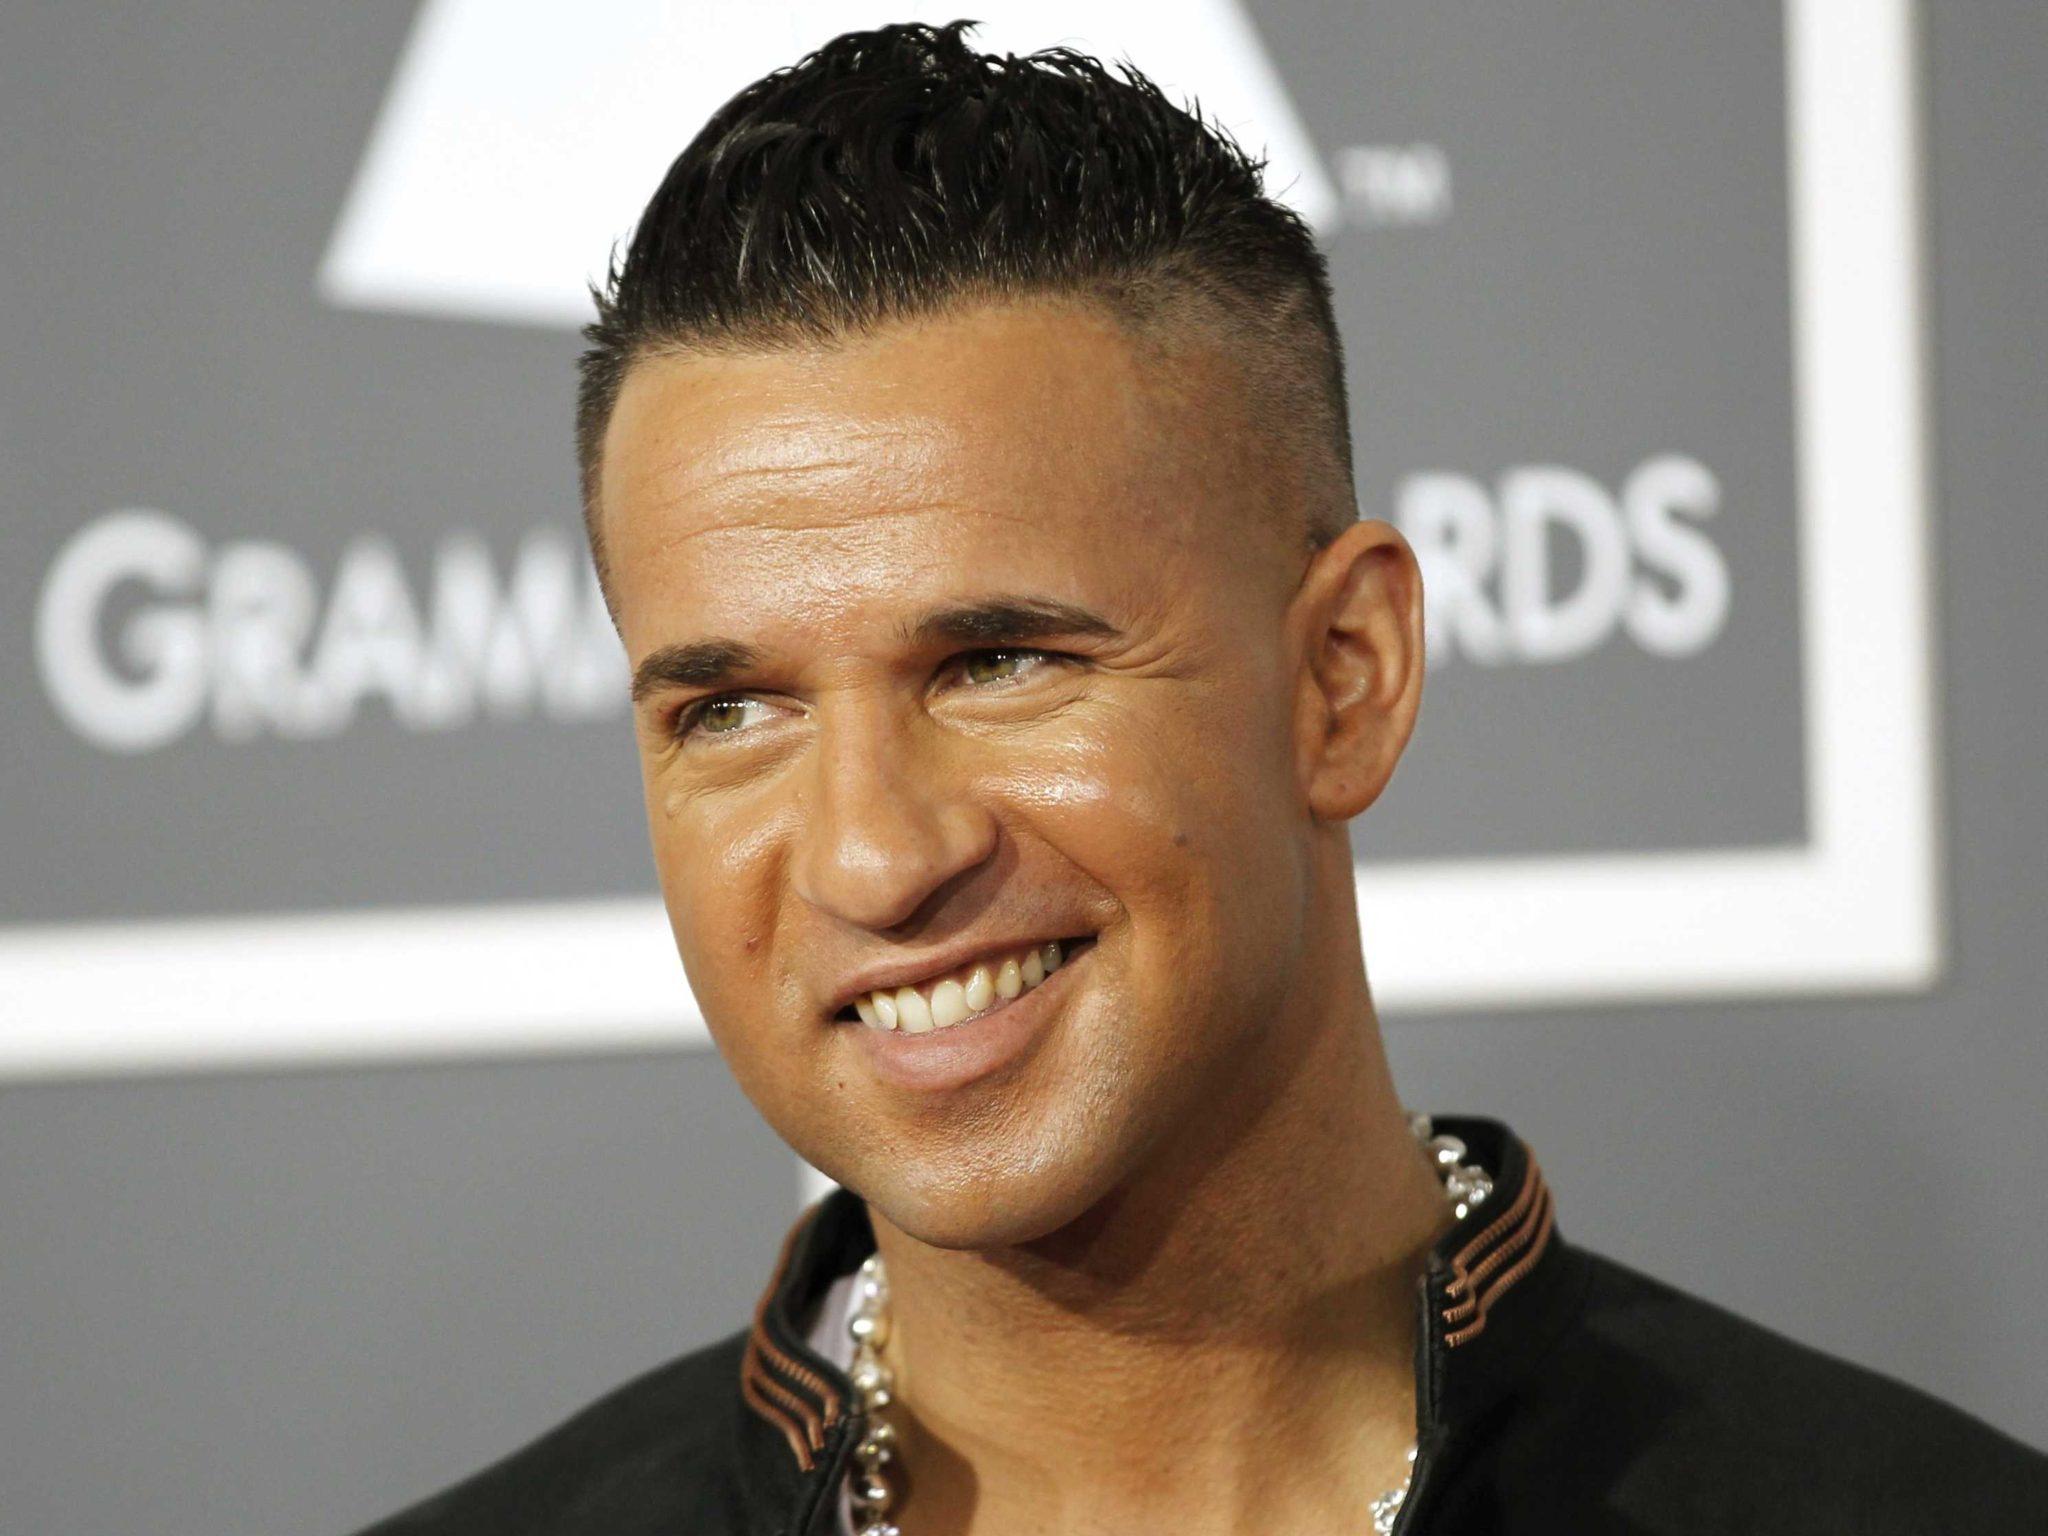 Mike “The Situation” Sorrentino Reveals Sobriety Success